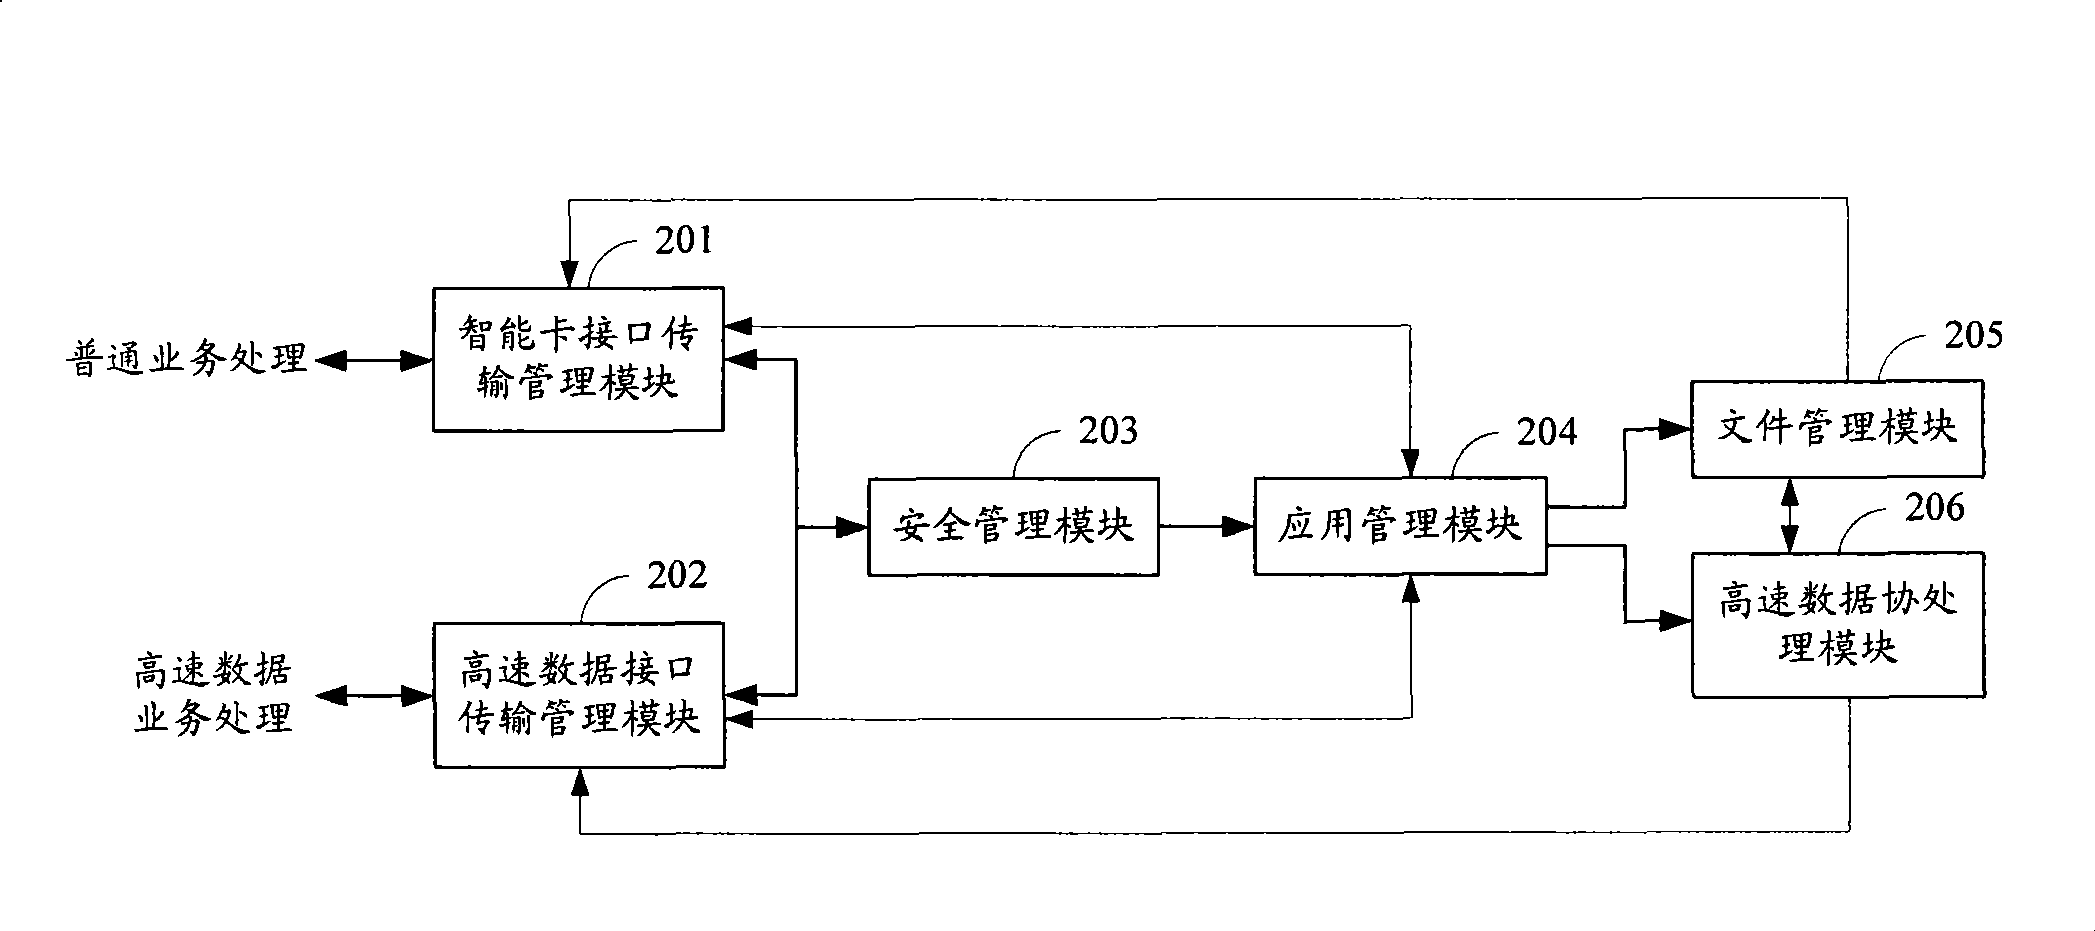 Operating system in double-interface smart card and its implementing method